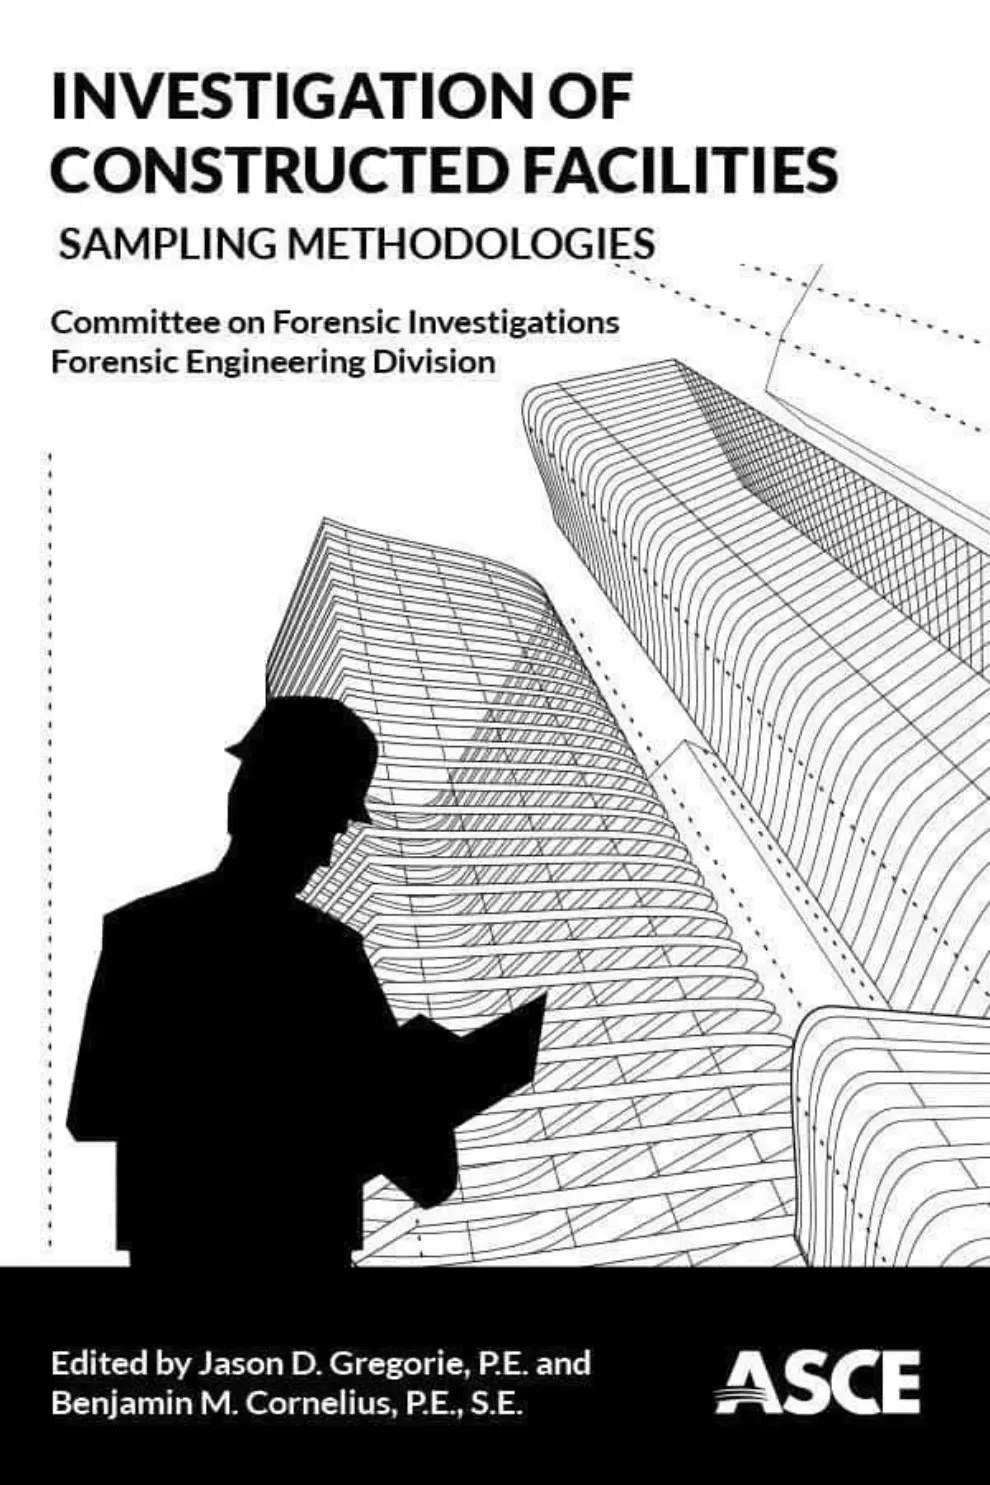 New ASCE Publication Uses Sampling Methods in the Investigation of  Constructed Facilities - Civil + Structural Engineer magazine